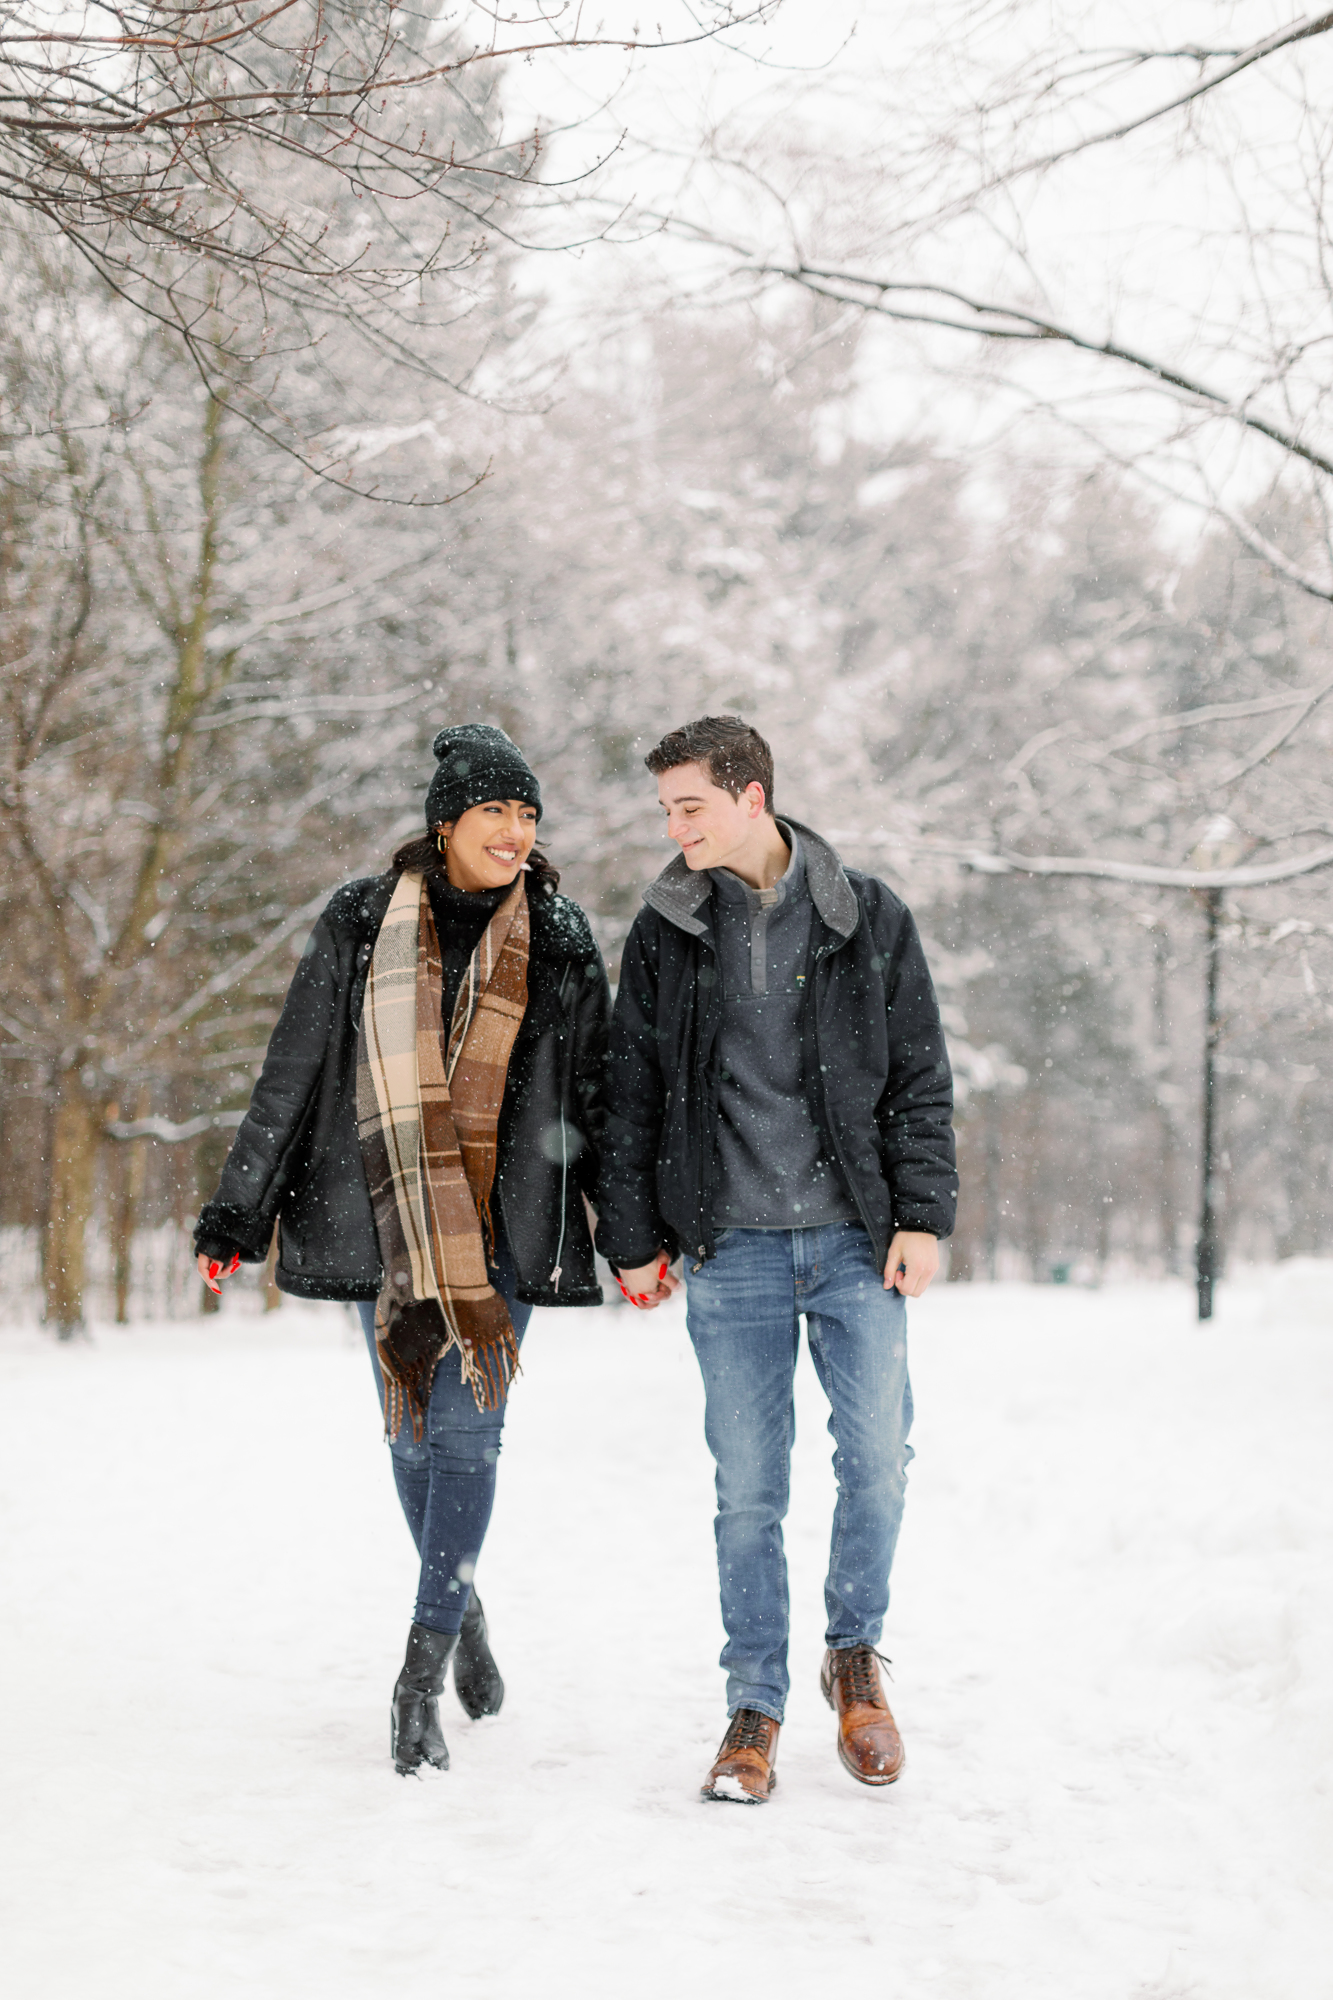 Sweet Winter Engagement Photos in Snowy Prospect Park